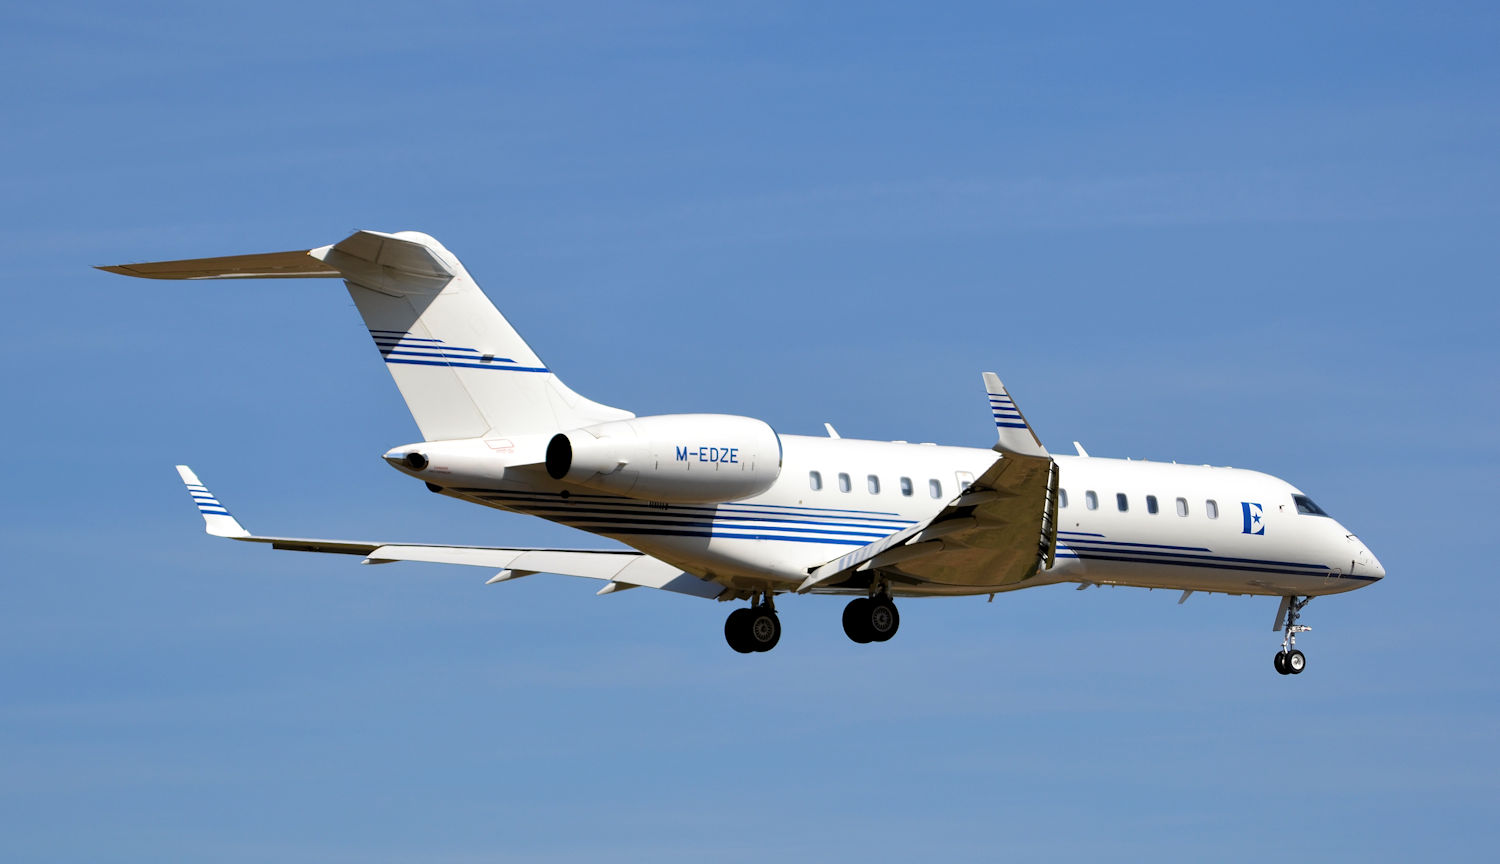 T7-LASM/T7LASM Corporate Bombardier Global Express Airframe Information - AVSpotters.com